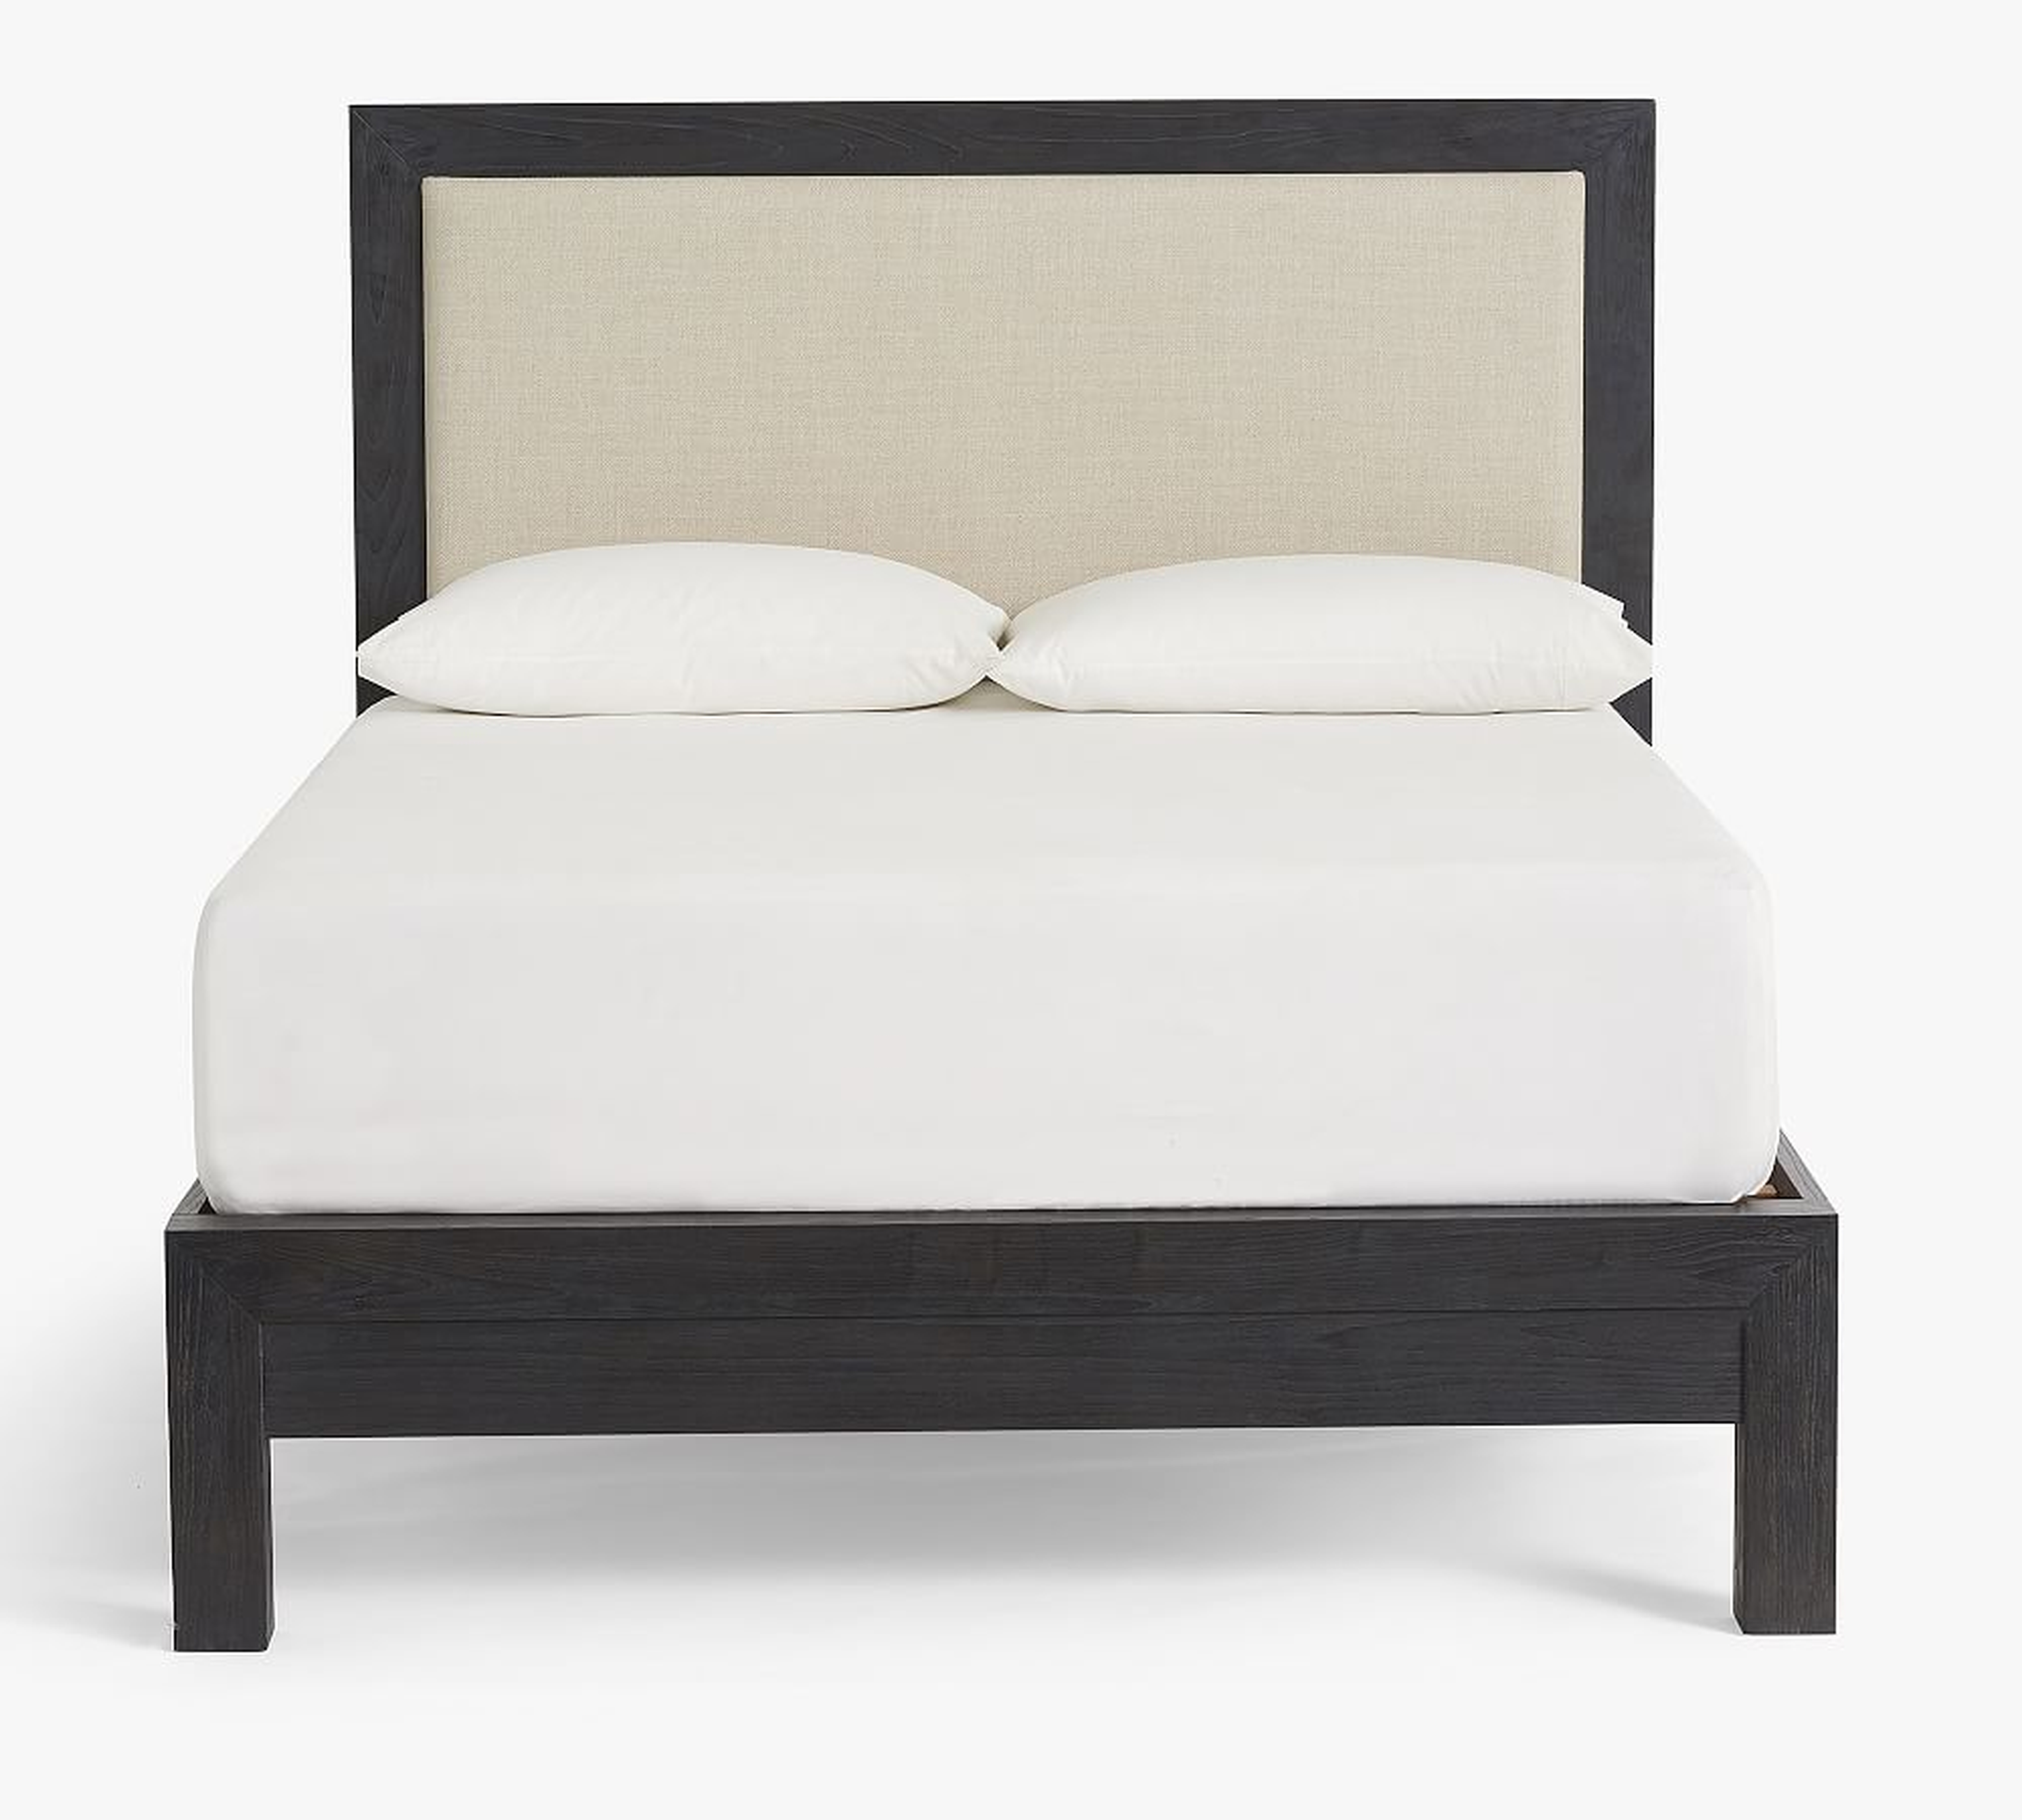 Linwood Platform Bed, Dusty Charcoal, King - Pottery Barn